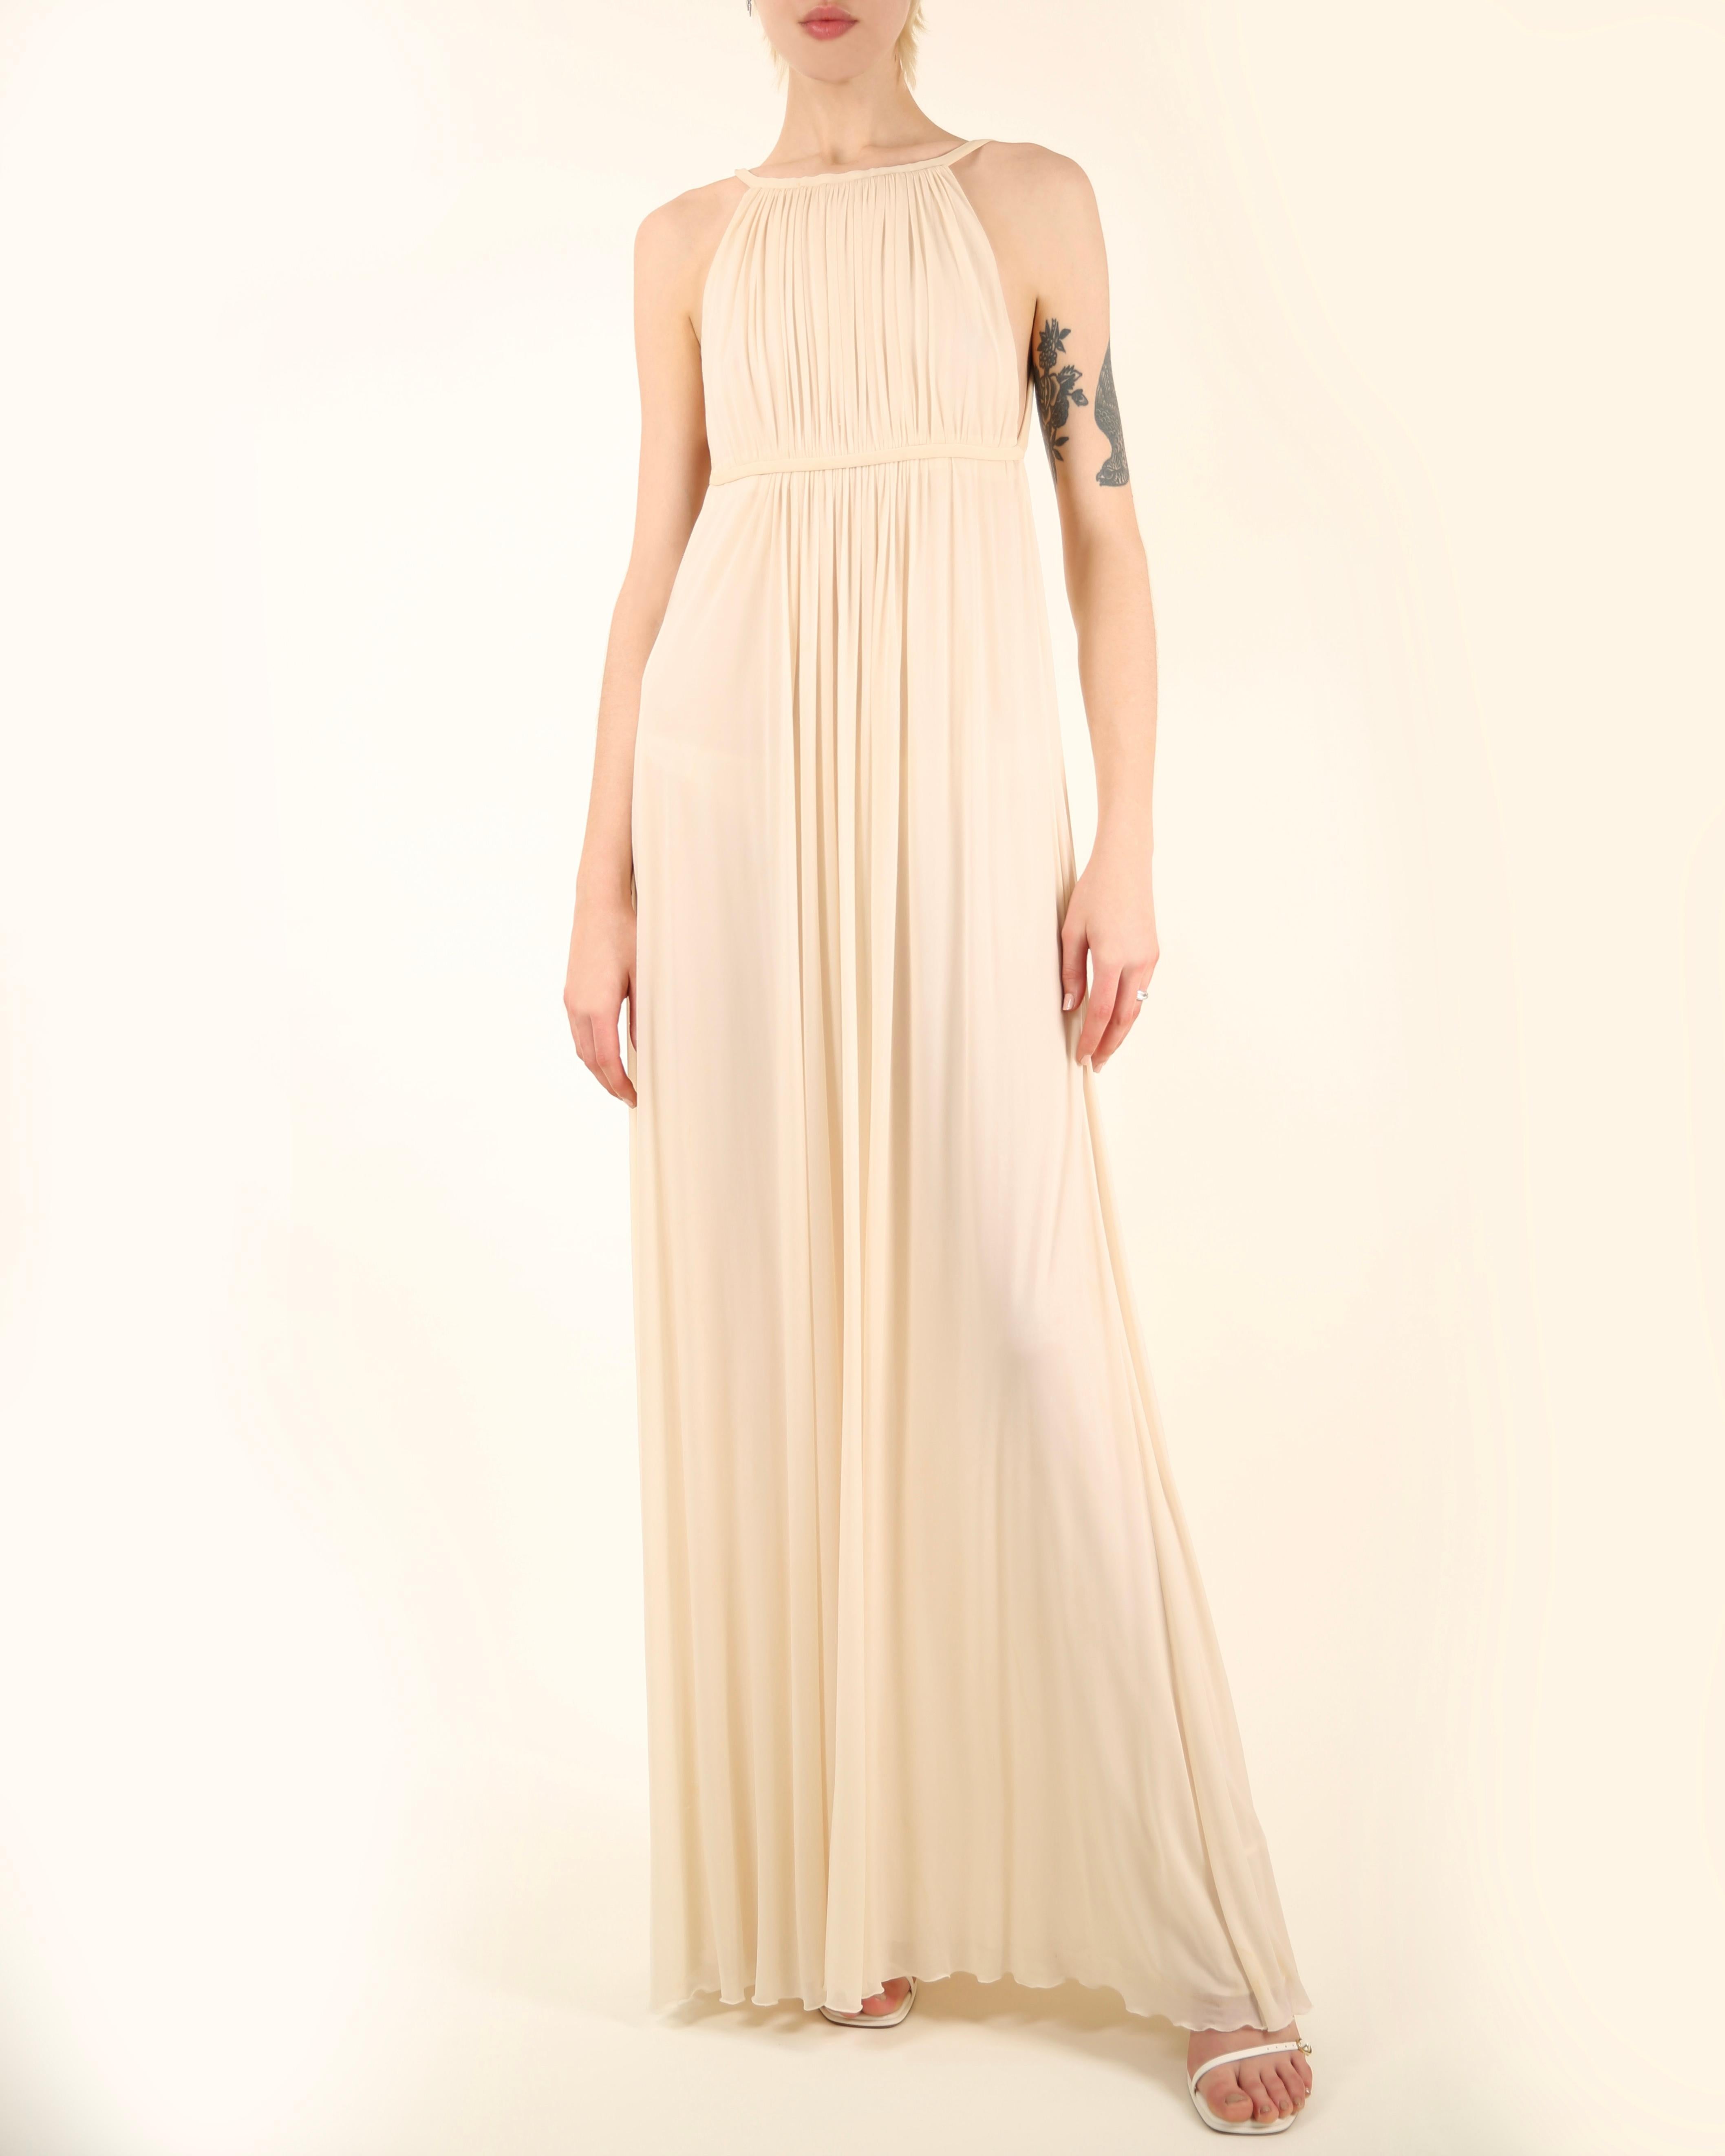 Halston 09 ivory cream plisse grecian style backless wedding maxi dress gown 42 In Fair Condition For Sale In Paris, FR